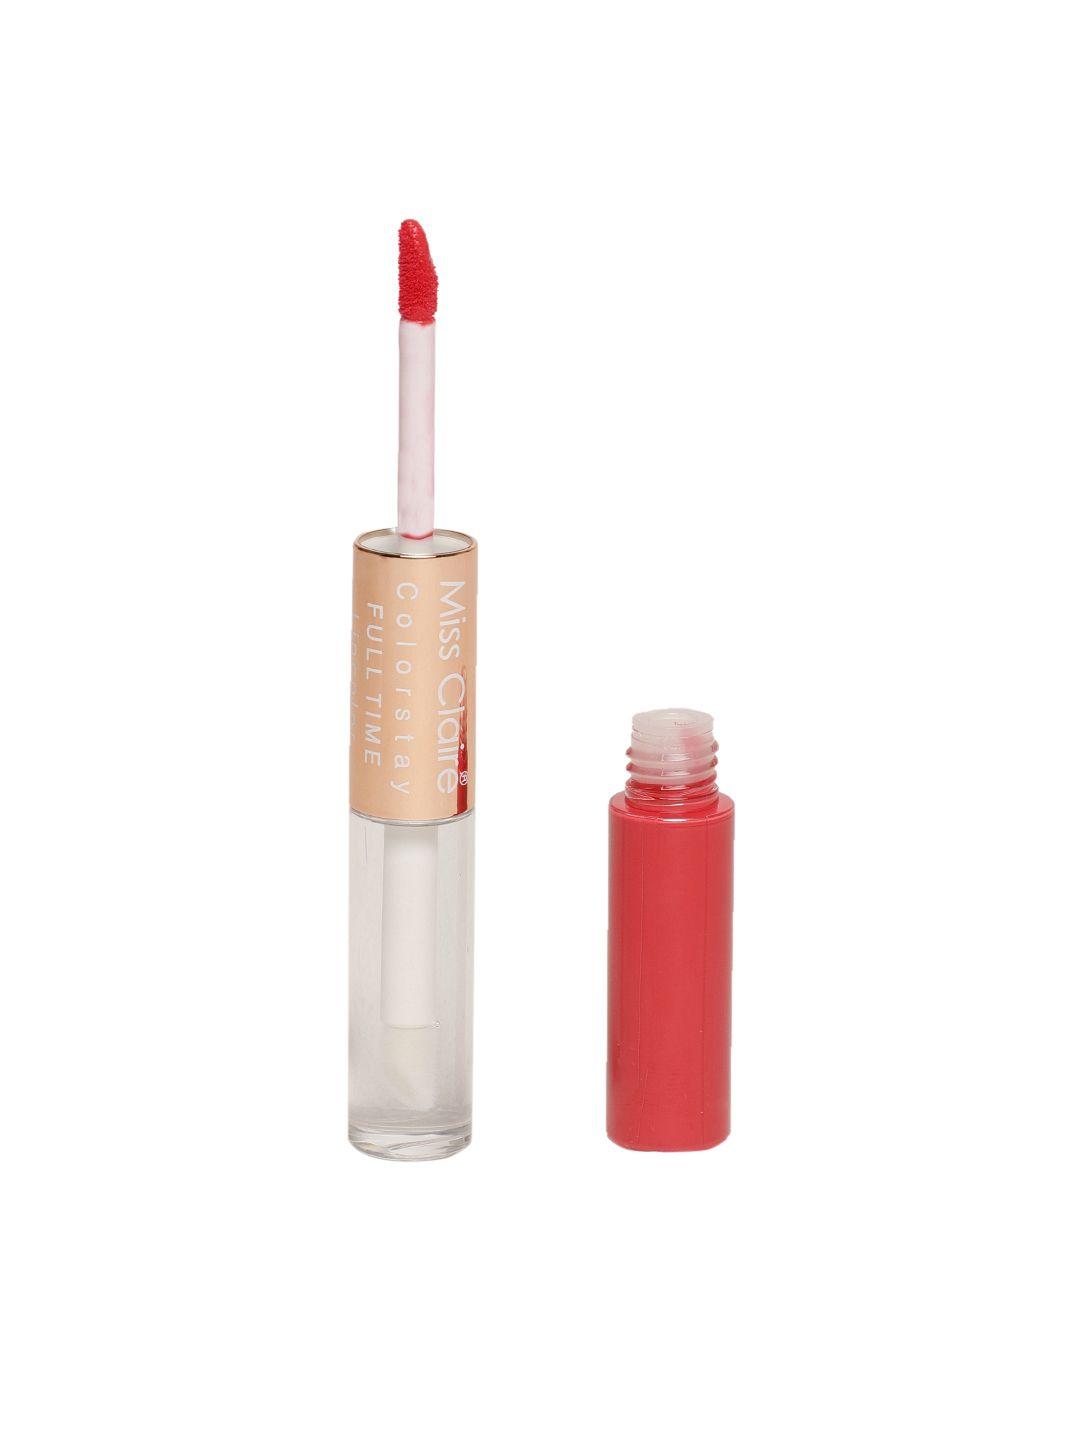 miss-claire-colorstay-full-time-21-lipcolor-10-ml